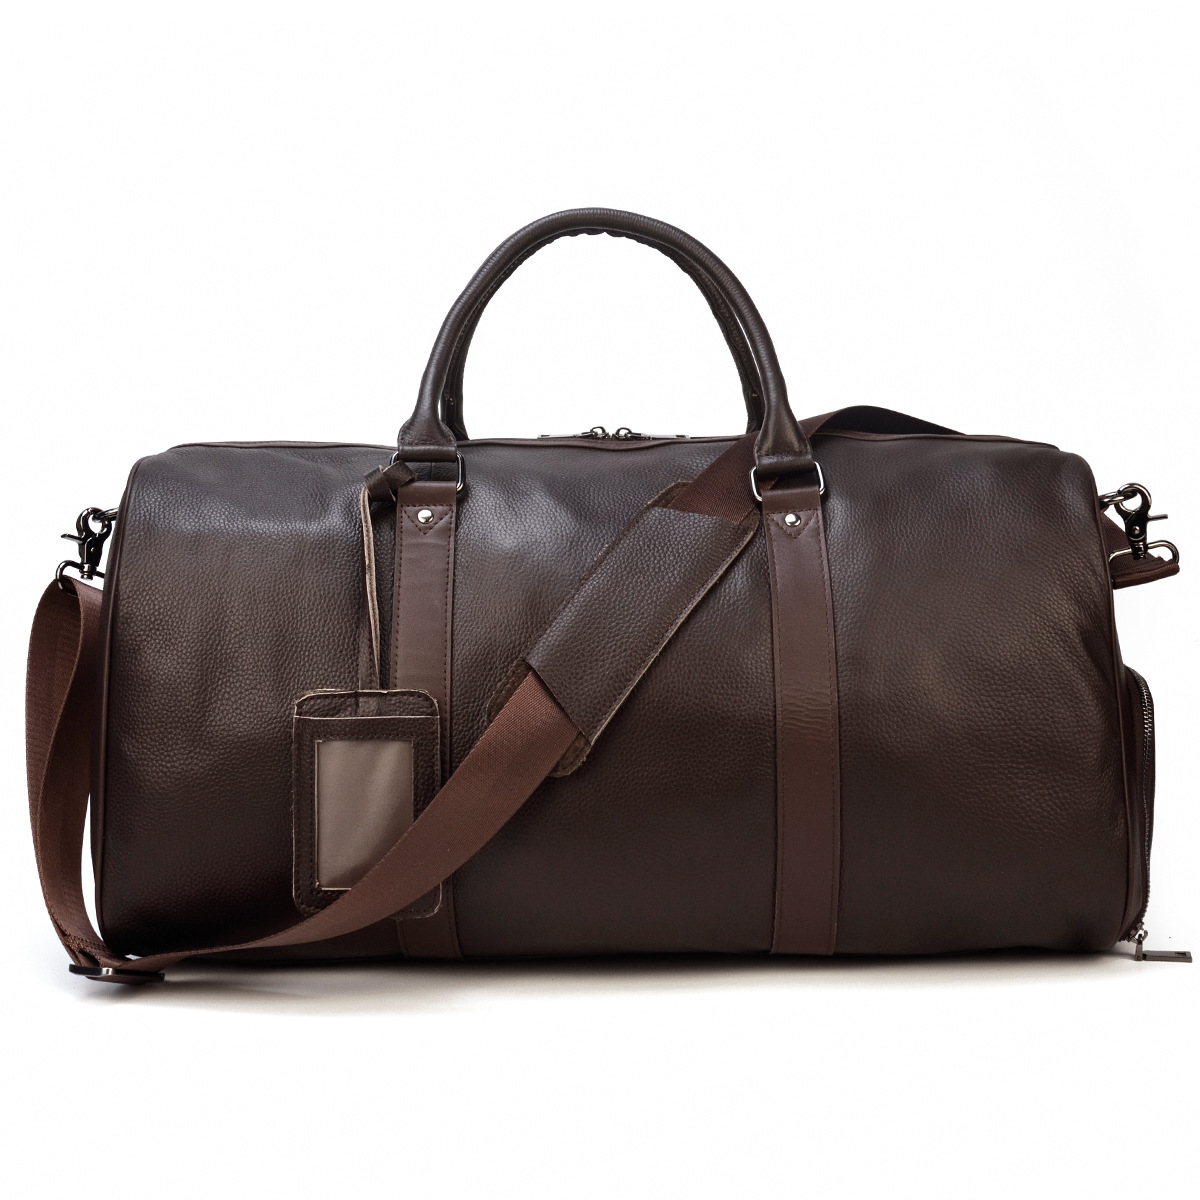 Large capacity leather travel bag for men and women